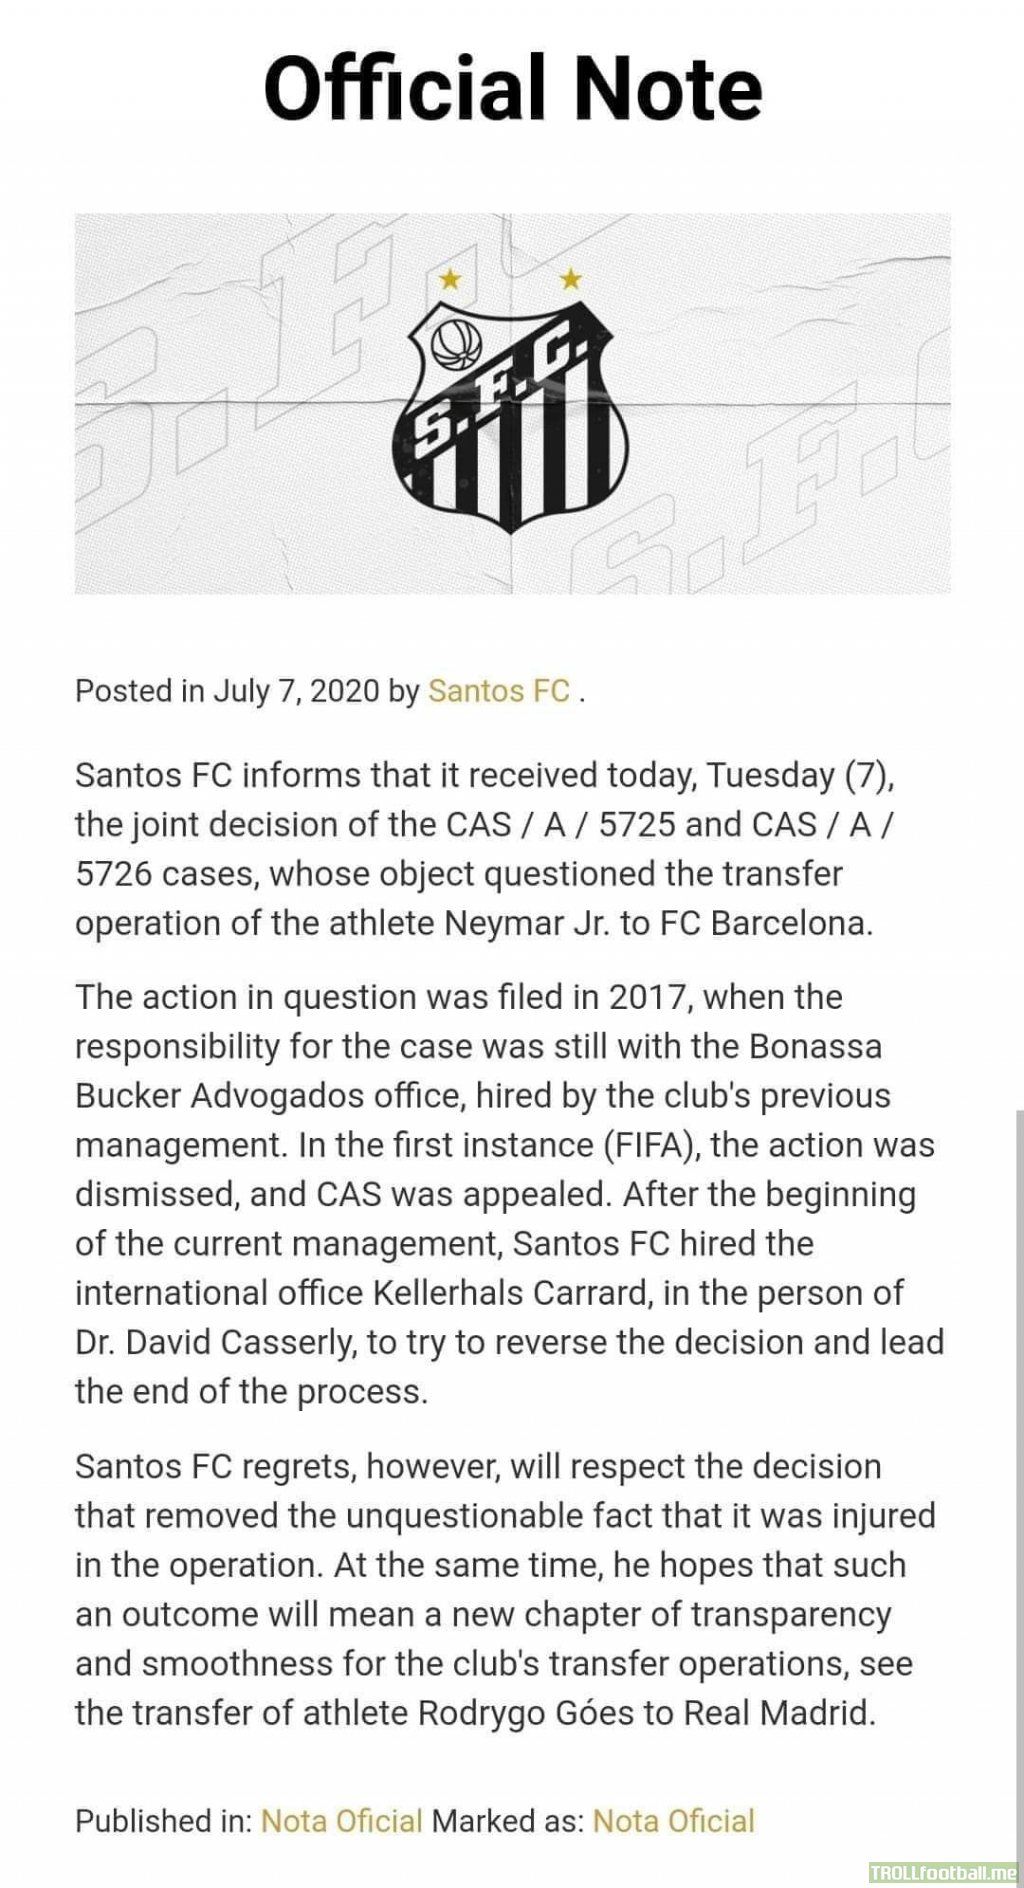 Santos FC, post the court order of Neymar transfer, release a statement expecting Barcelona to show more transparency in the future by giving an example of the transfer of Rodrygo Goes to Real Madrid. Source: [https://www.santosfc.com.br/nota-oficial-42/]